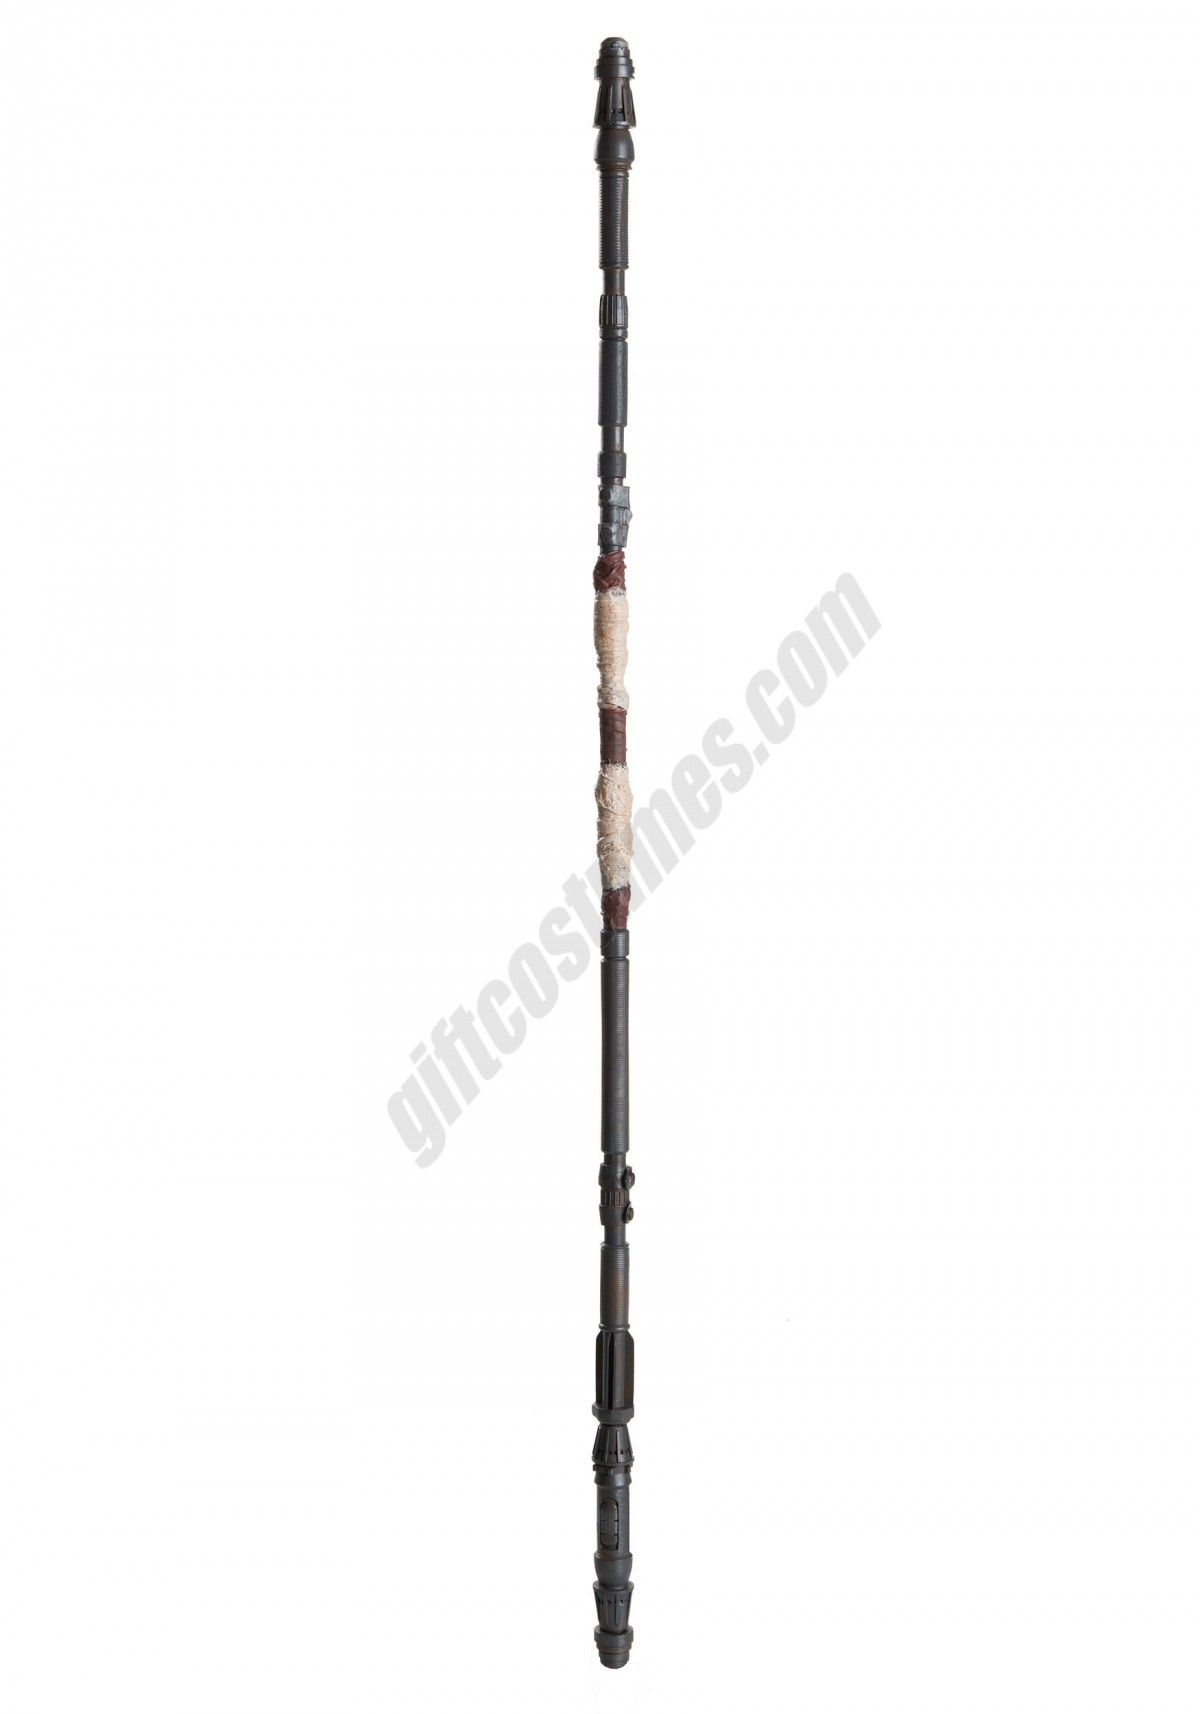 Star Wars The Force Awakens Rey Staff Accessory Promotions - -0